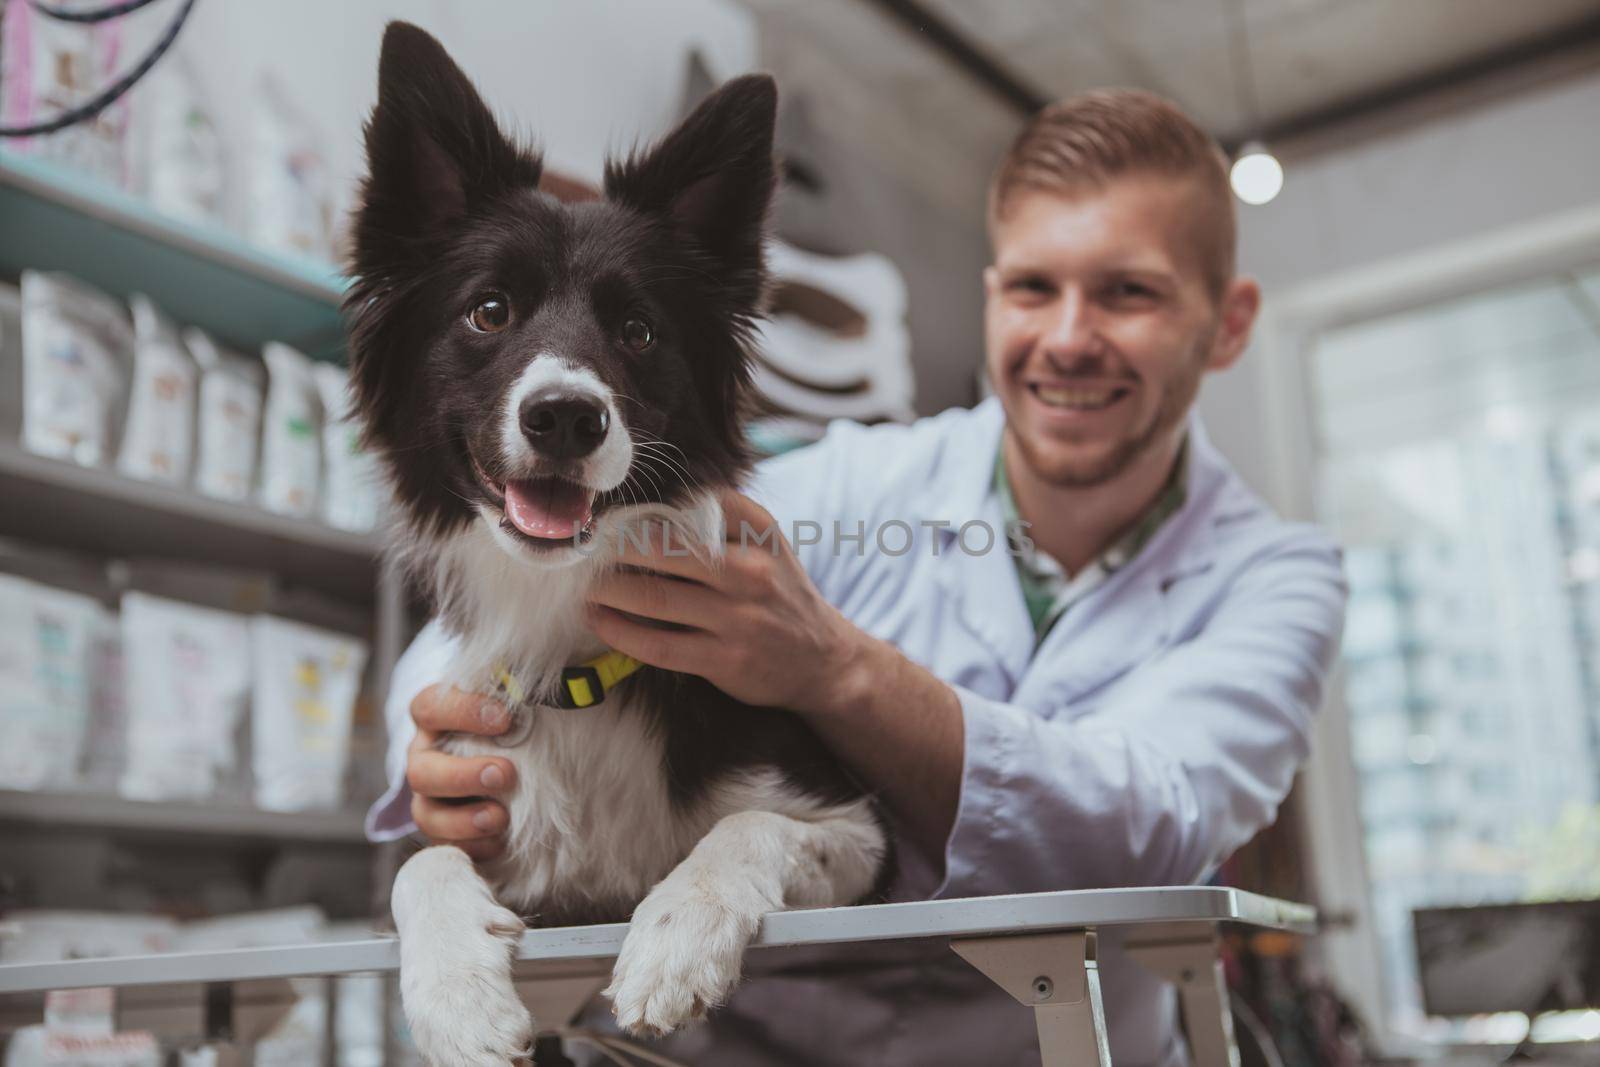 Adorable healthy happy dog looking to the camera with its tongue out, handsome male vet working at his clinic. Professional veterinarian petting cute black dog on examination table